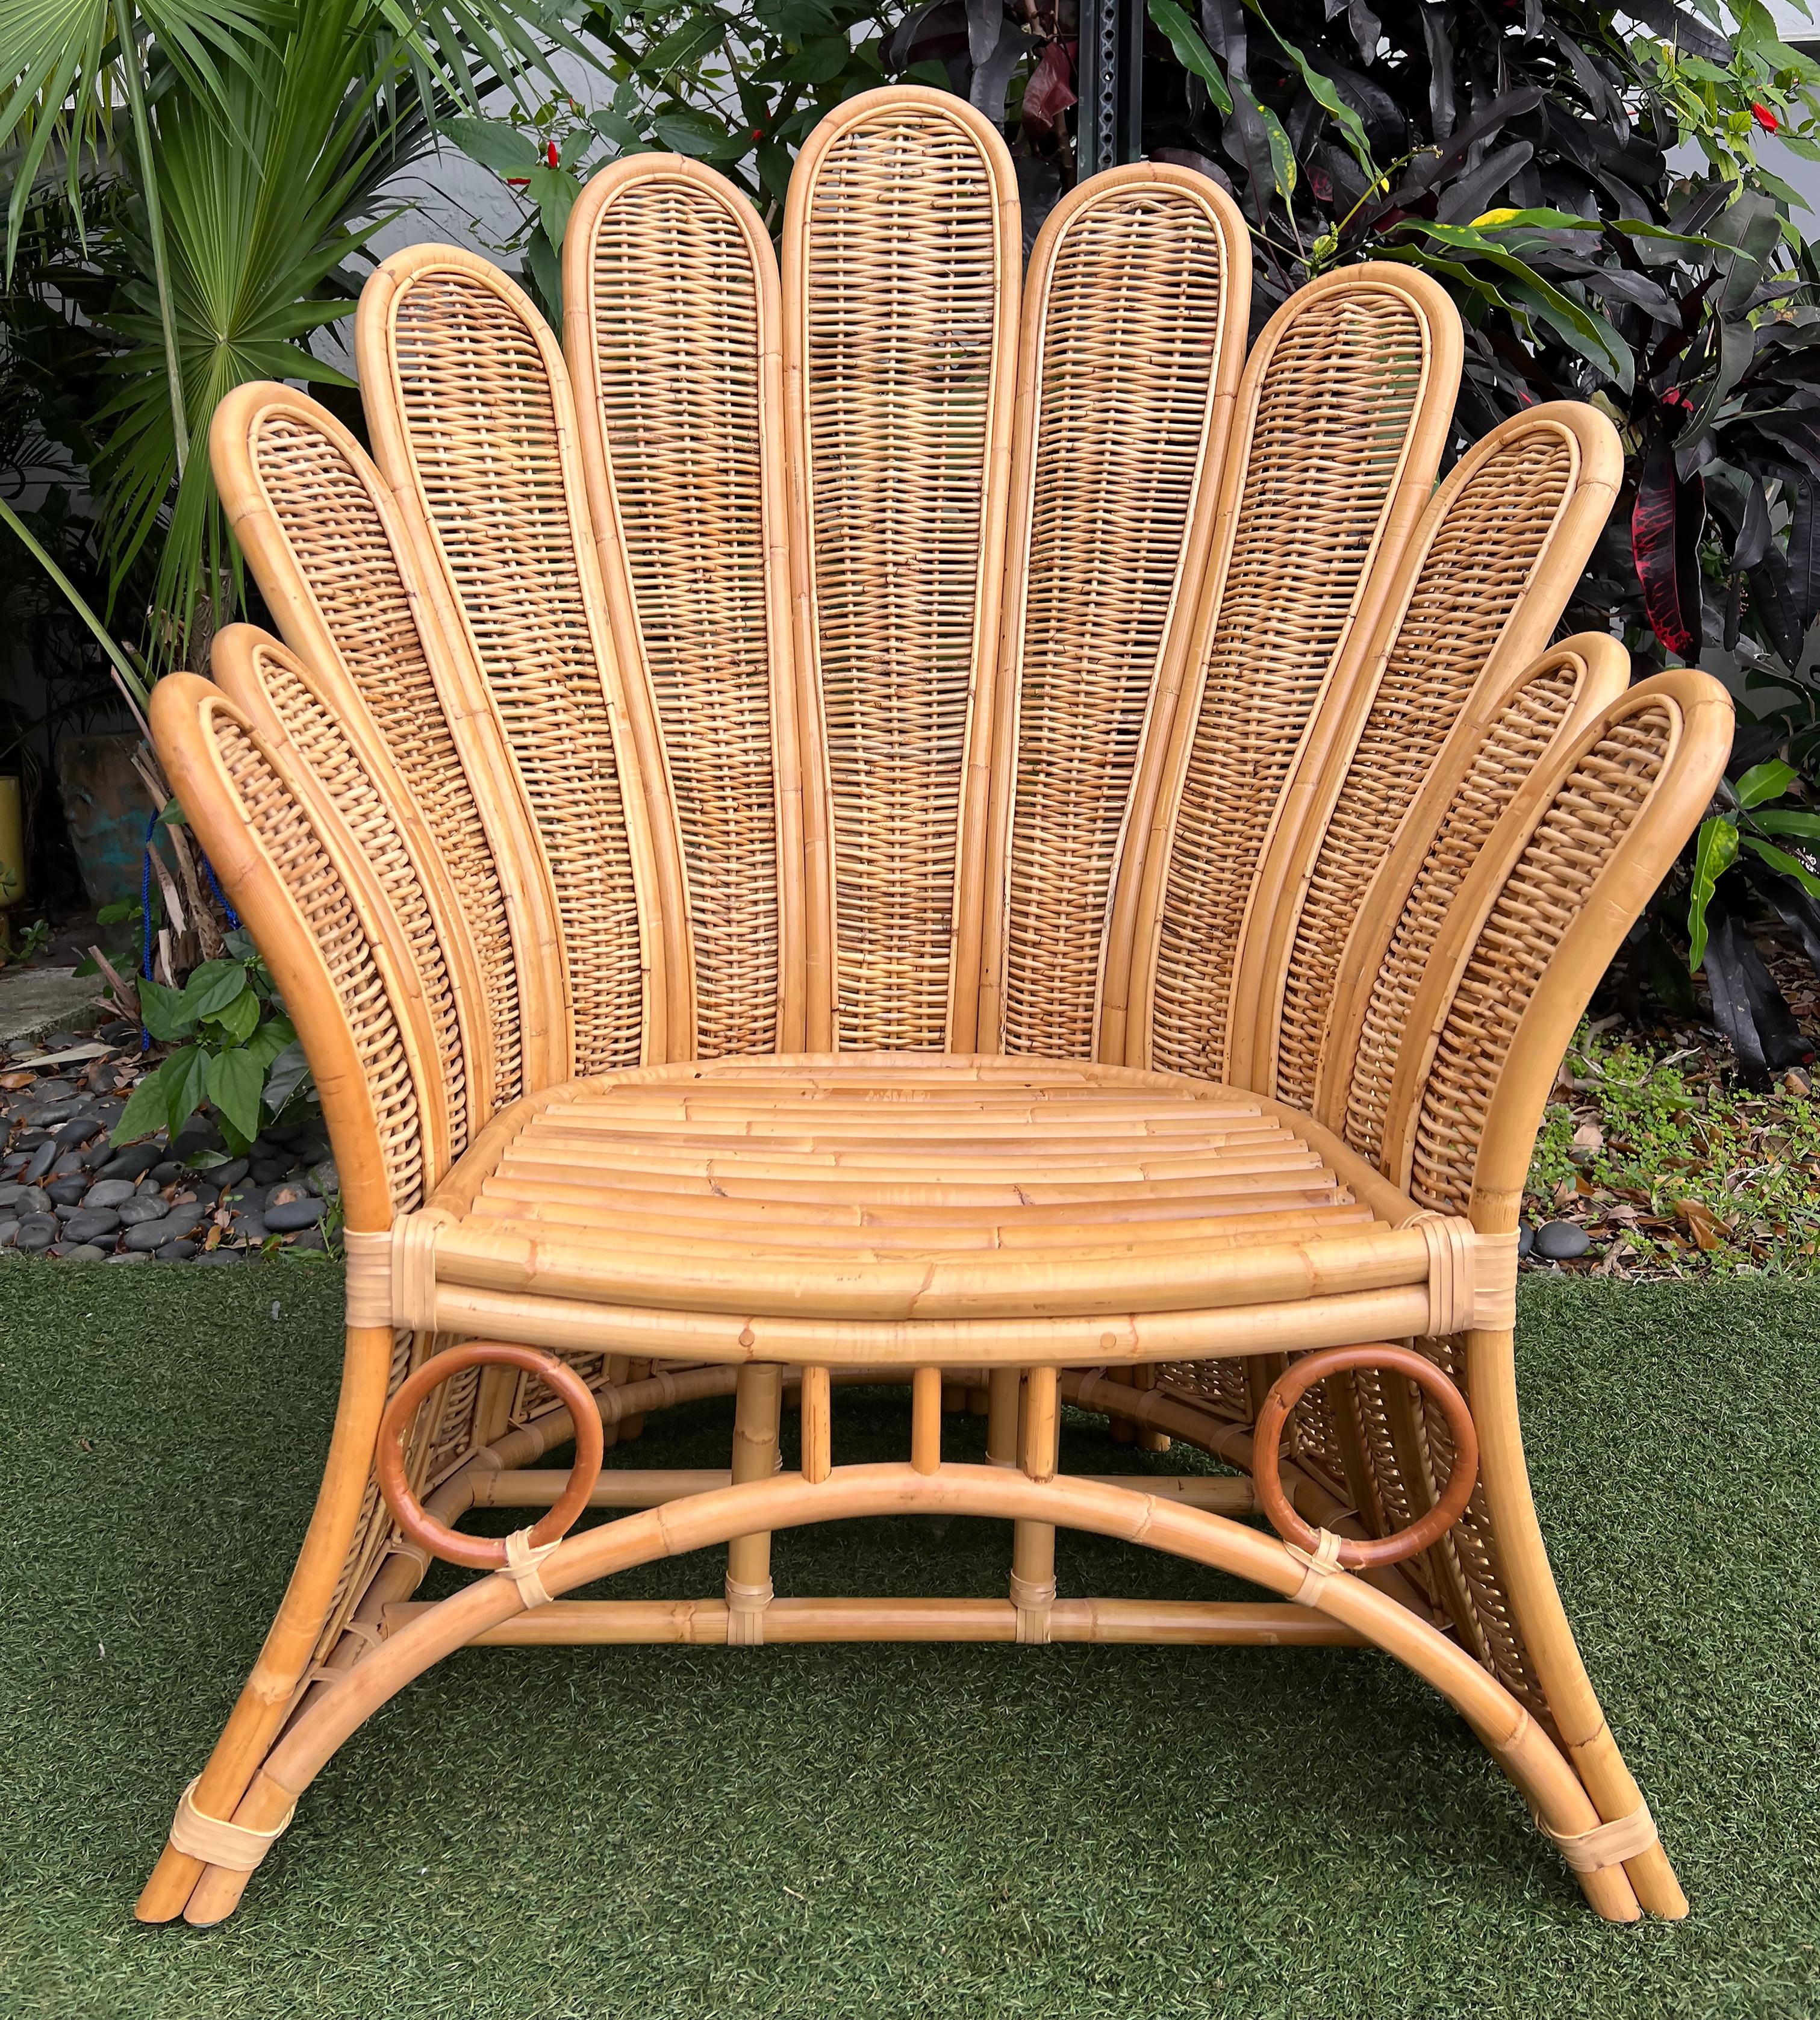 Vintage Mid-Century Rattan Peacock Fan Back Chair

Offered for sale is an elegant and impressive mid-century bent rattan peacock fan back chair with splayed legs at match the curves of the top back fan. The curved panels are finished with woven